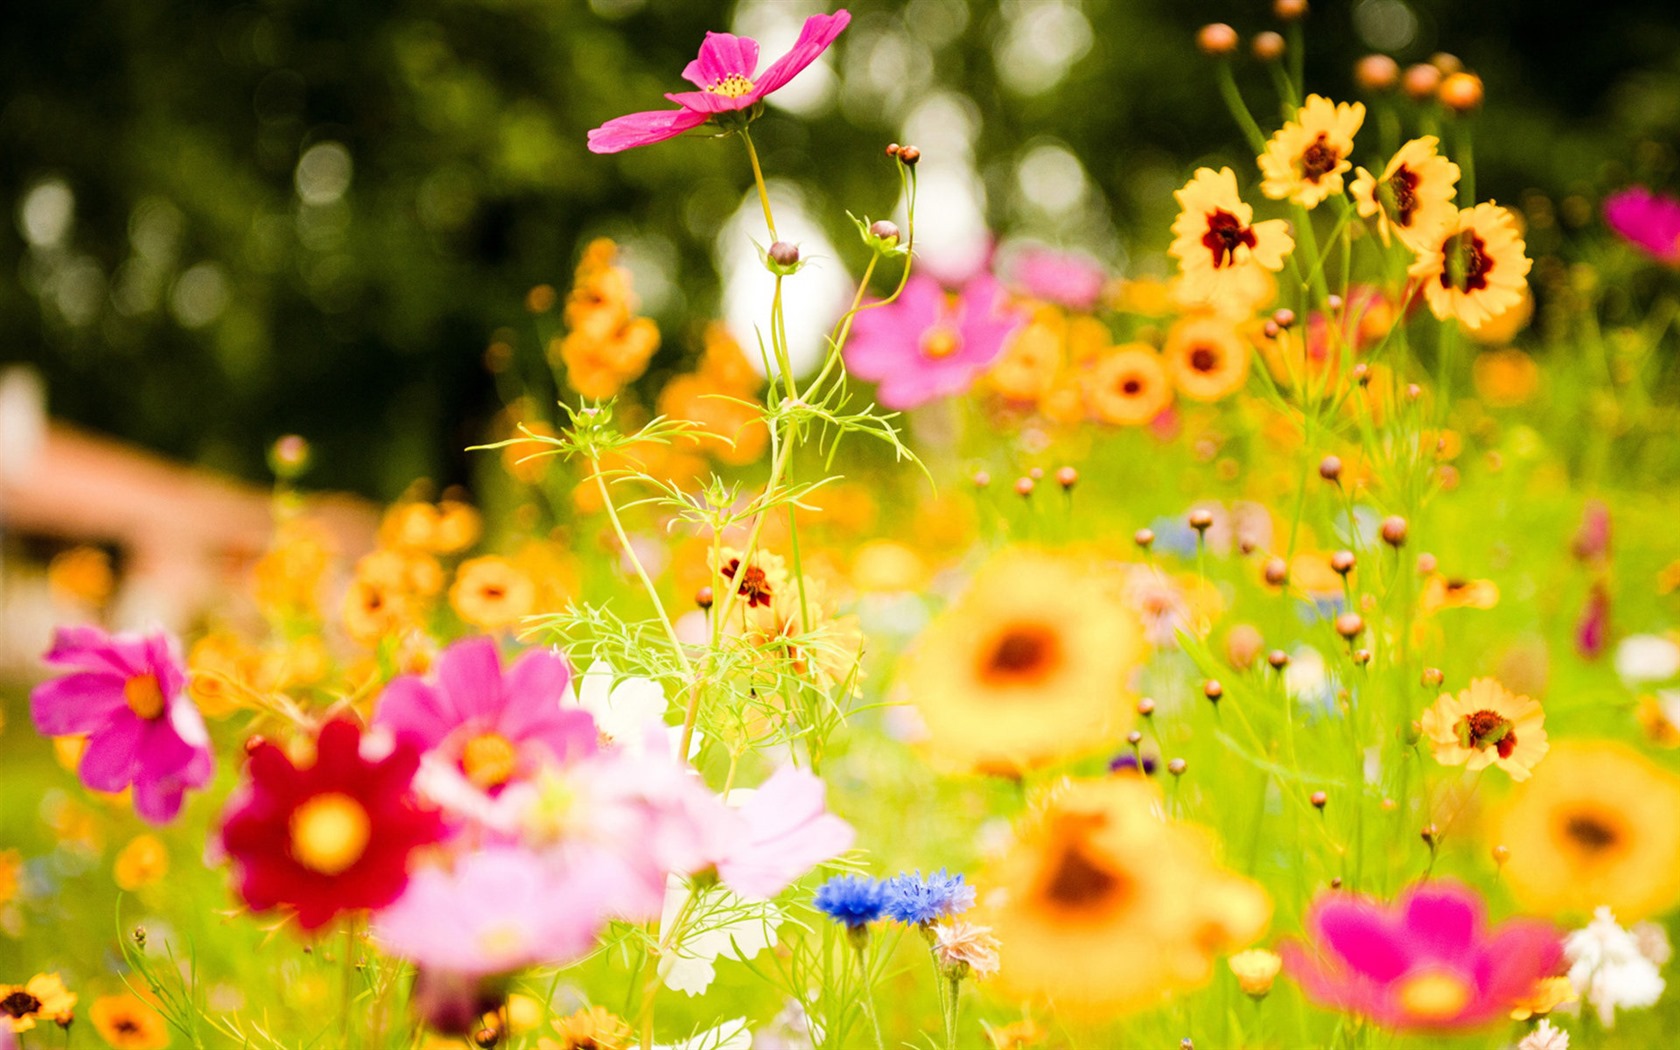 Fresh flowers and plants spring theme wallpapers #6 - 1680x1050